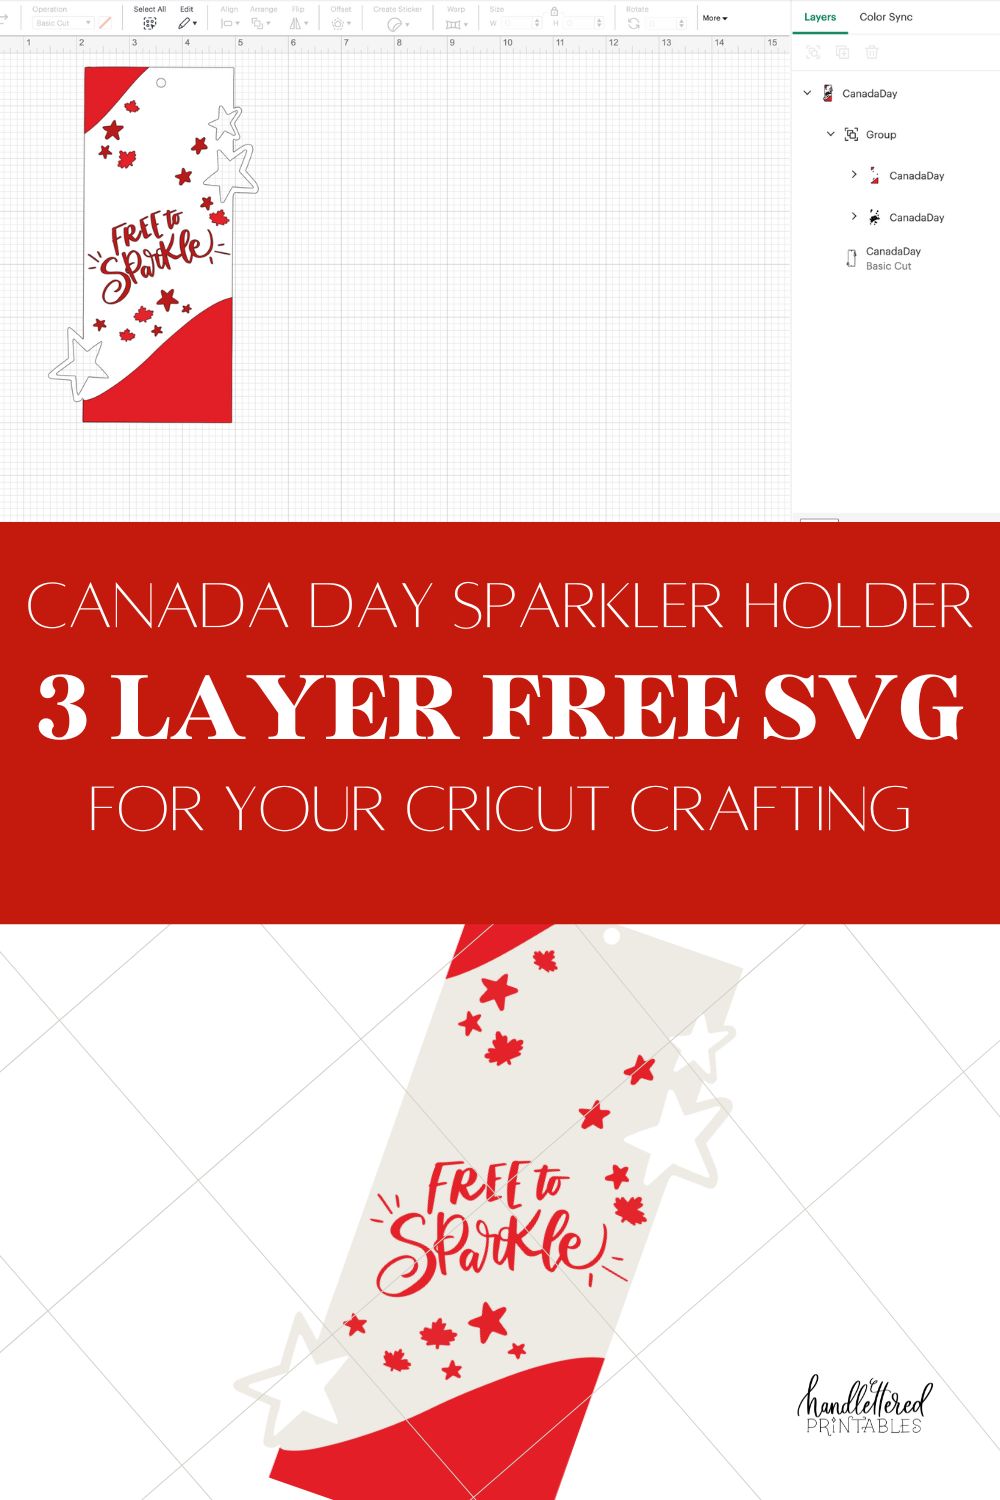 2 image collage, first image of canada day sparklers holder uploaded to canvas in cricut design space, showing layers 2nd image showing cut file on a white background cut file reads: free to sparkle in hand lettering text over image reads: canada day sparkler holder 3 layer free svg for your cricut crafting